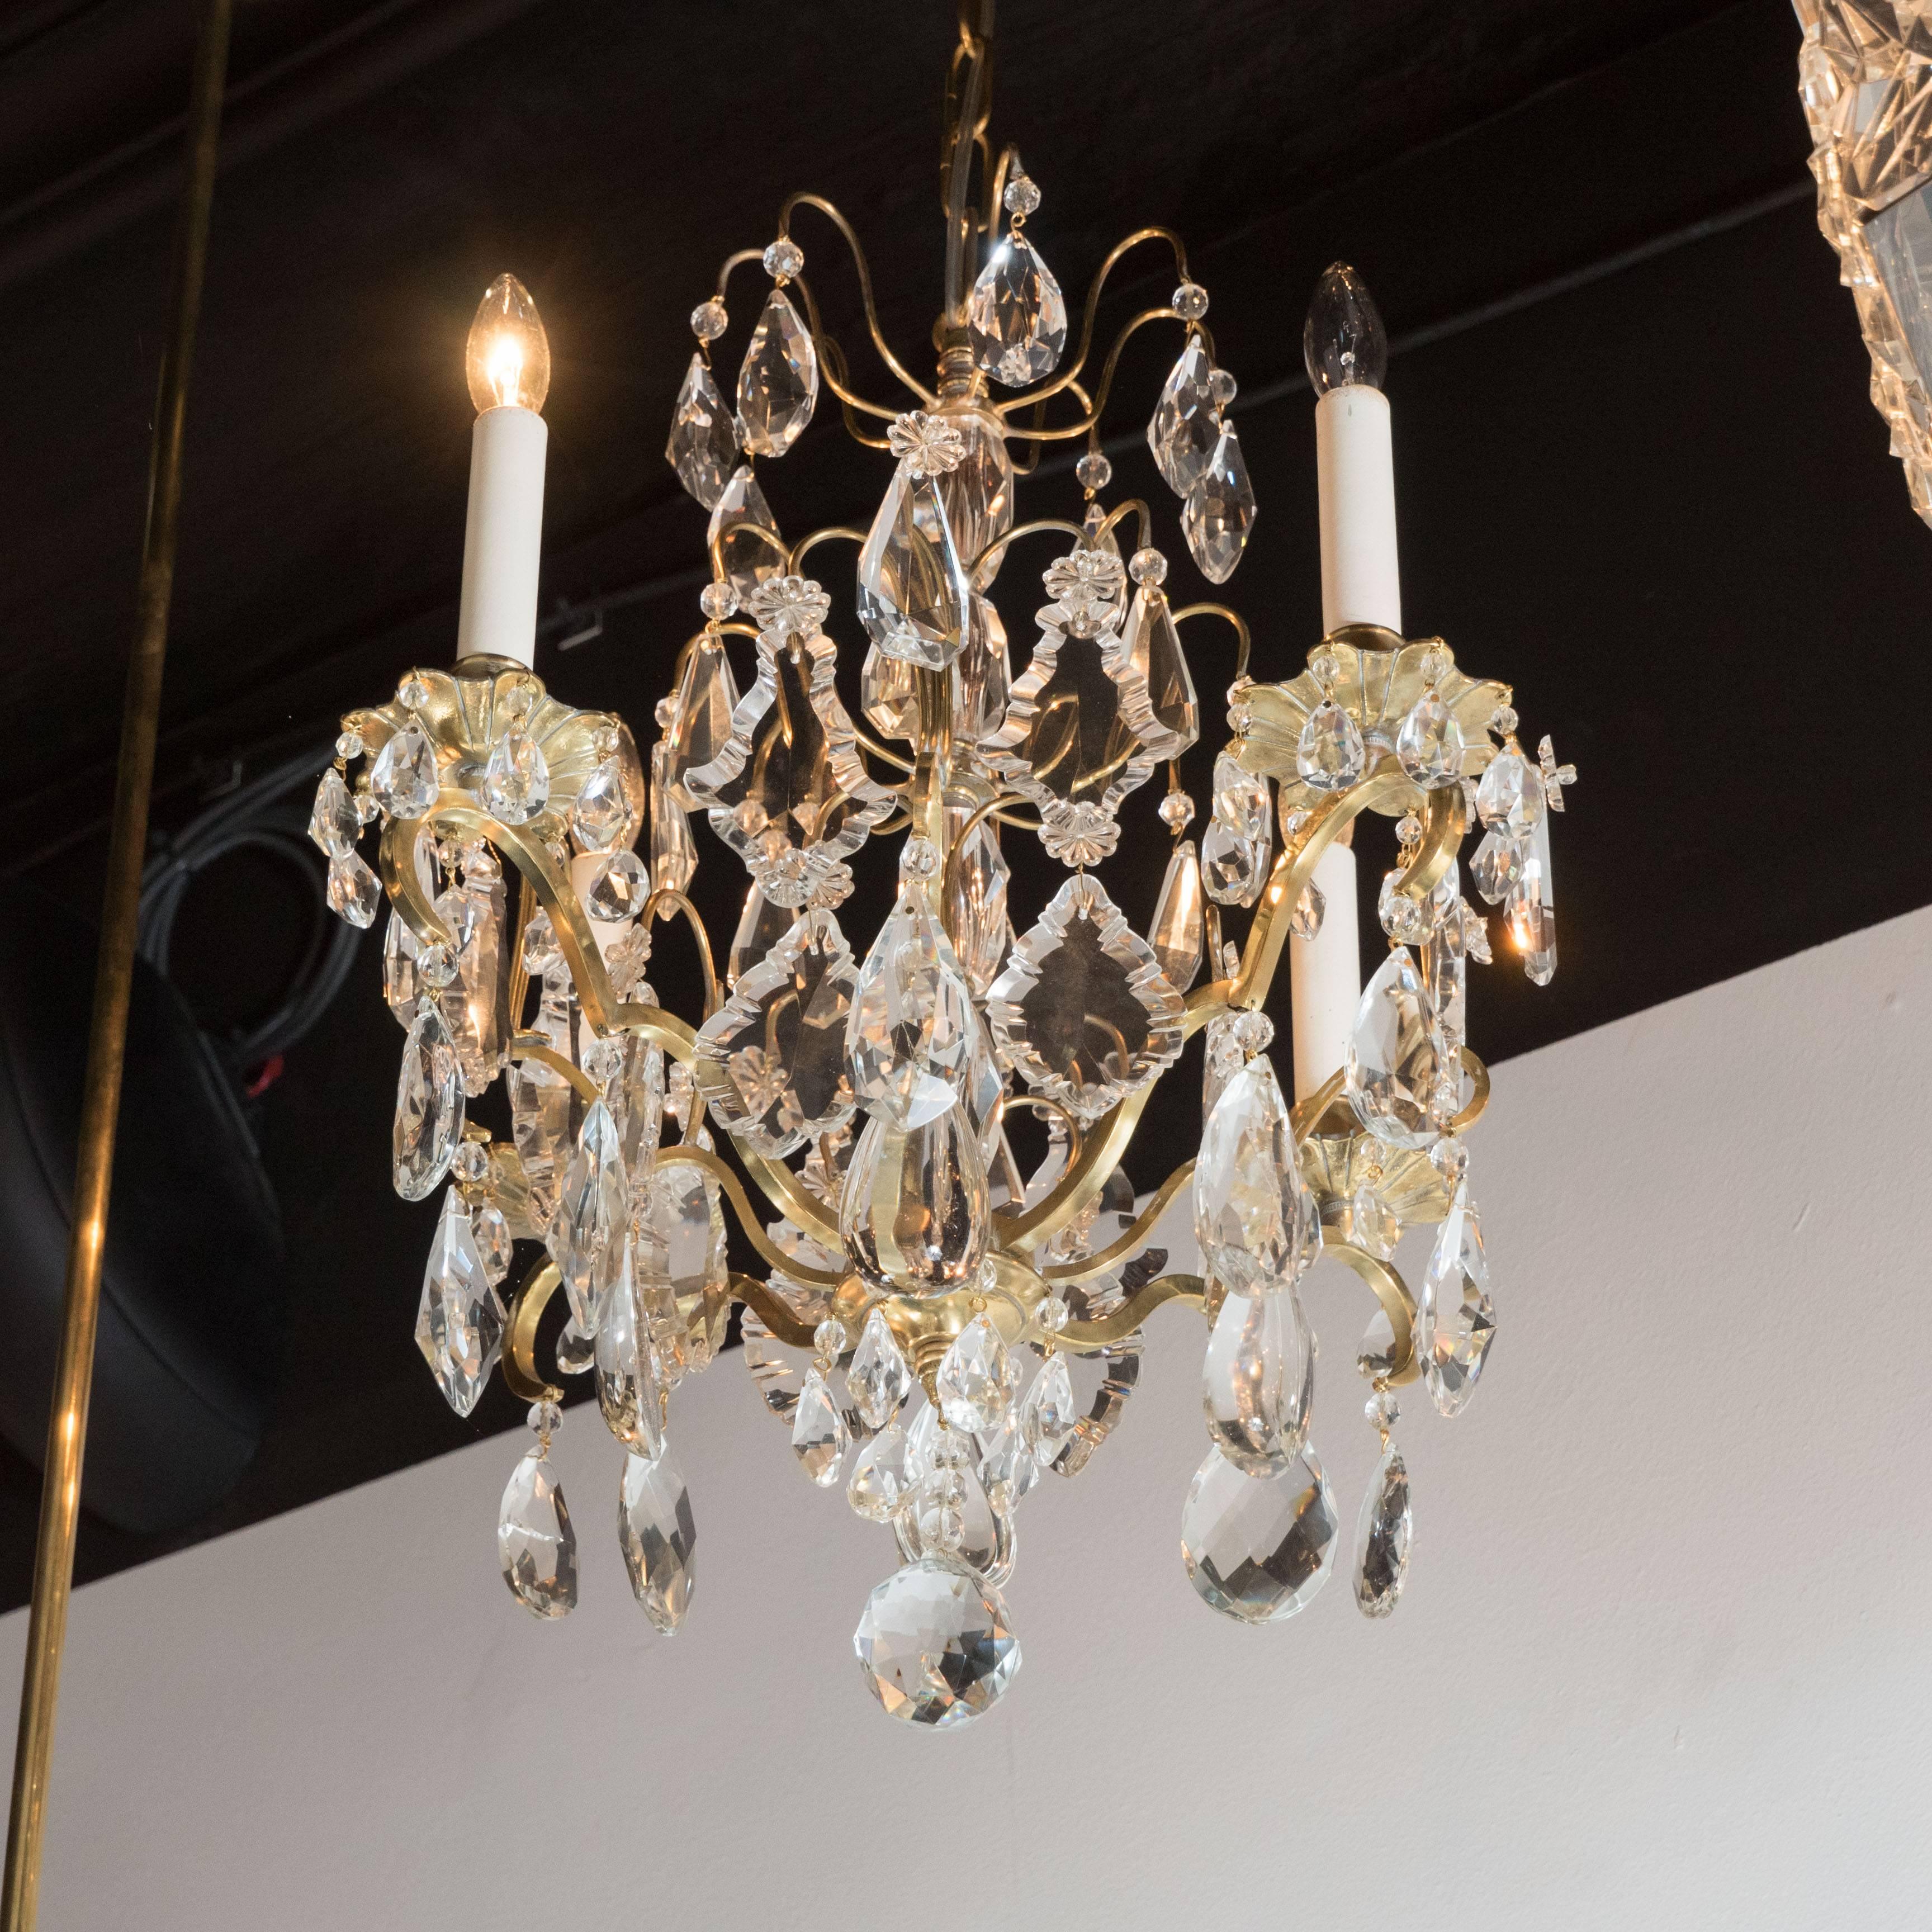 A Louis XV style gilt bronze and rock crystal four-light chandelier of cage form, with central knotted baluster and tier of prisms, with a large faceted round cut crystal ball form pendant. Newly rewired and height can be adjusted to suit.